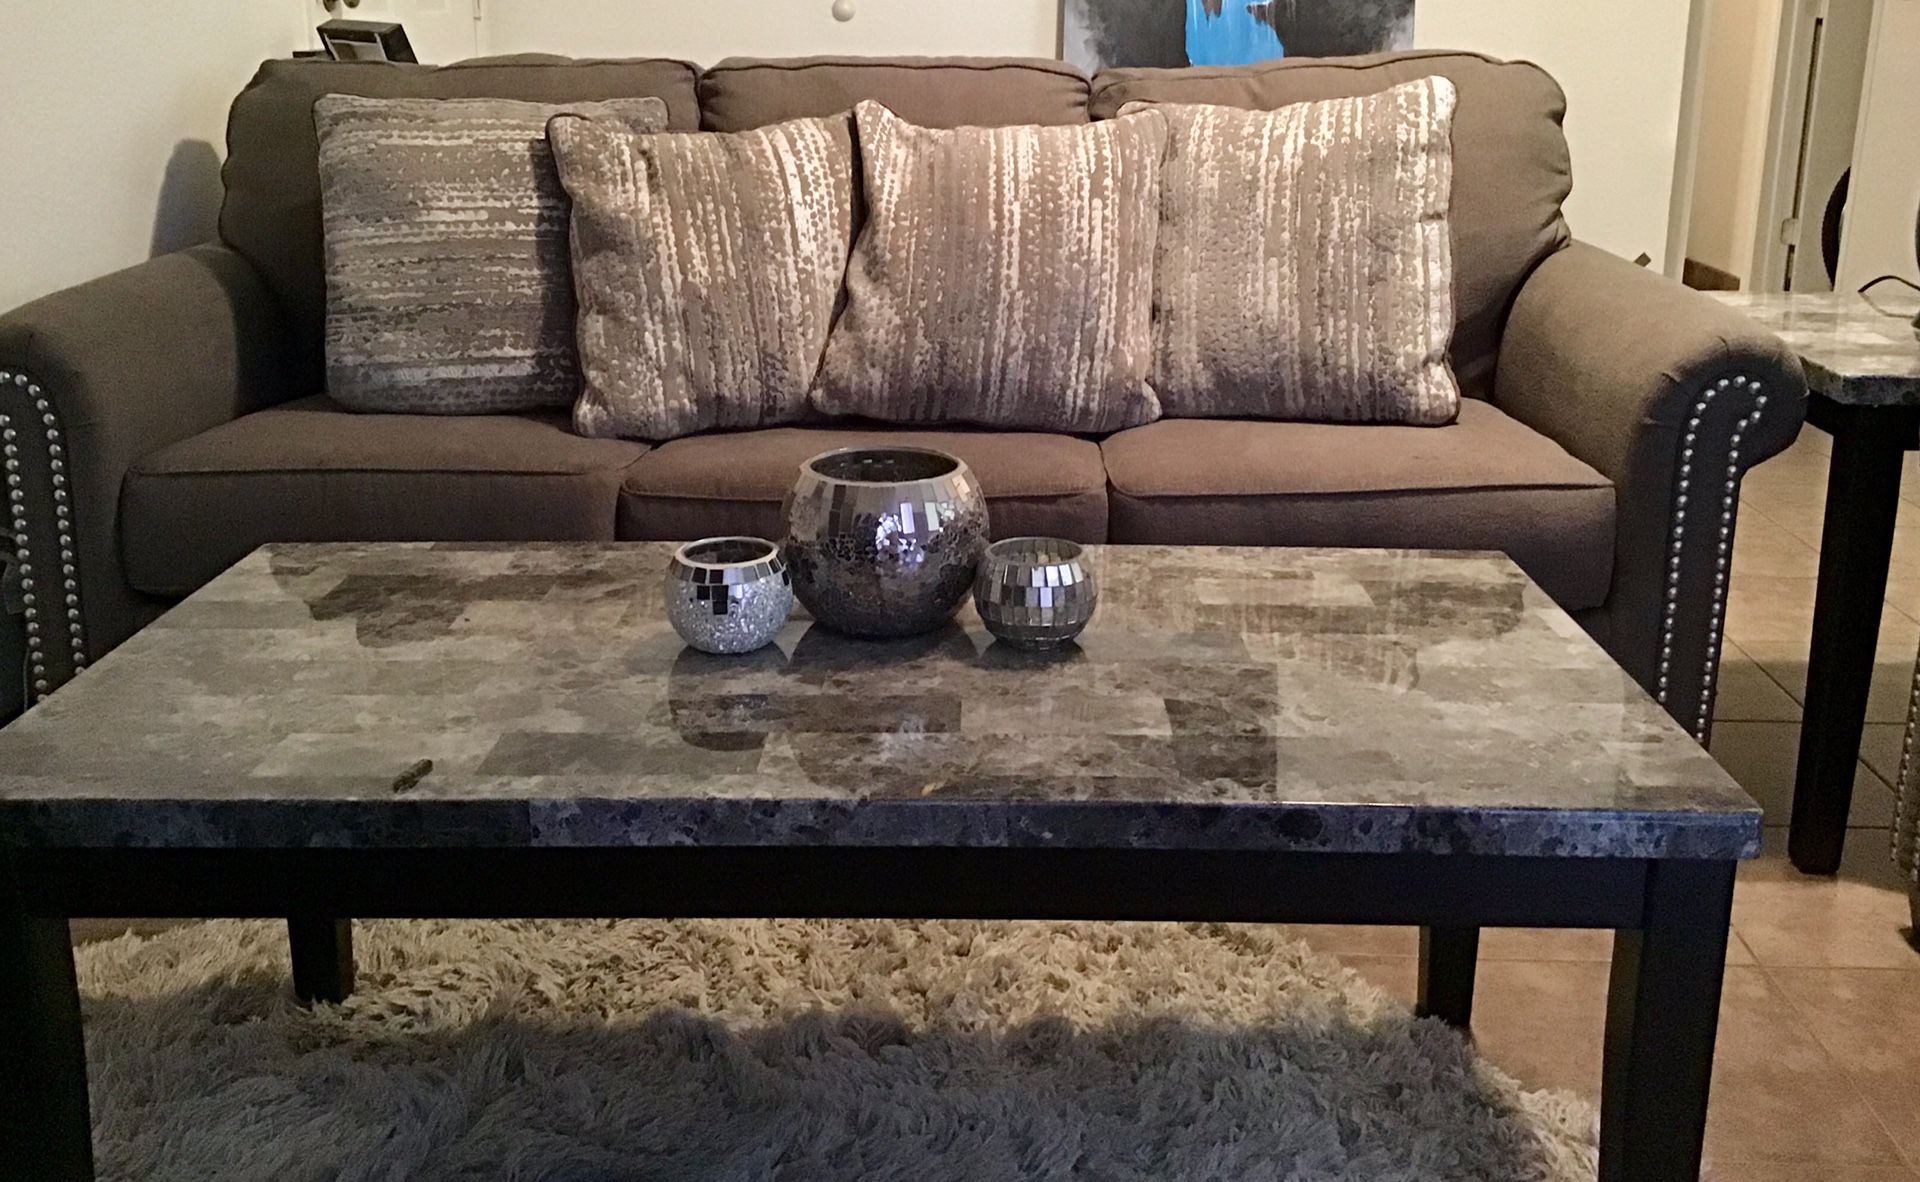 Like new 7 piece living room set! Moving, must sell ASAP!